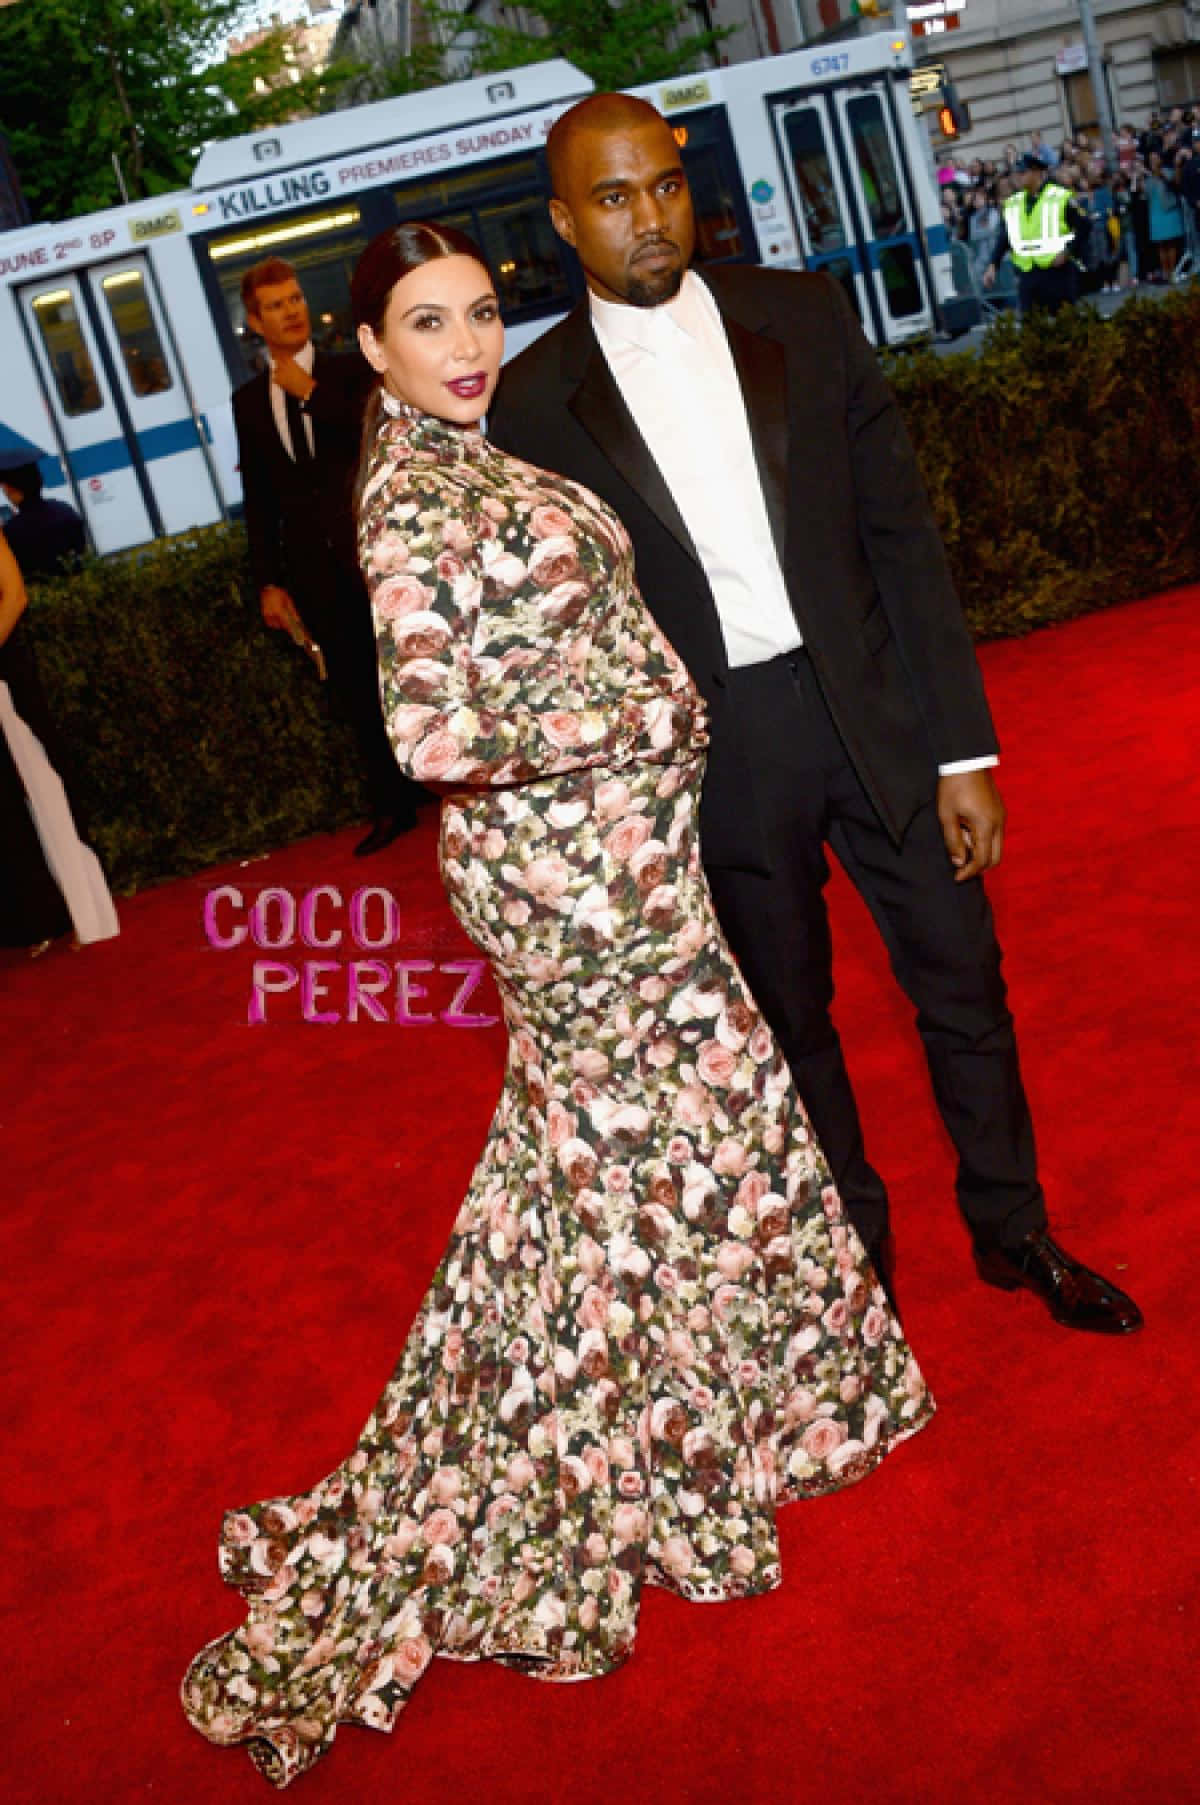 Celebrities Shine on the Red Carpet at the Met Gala